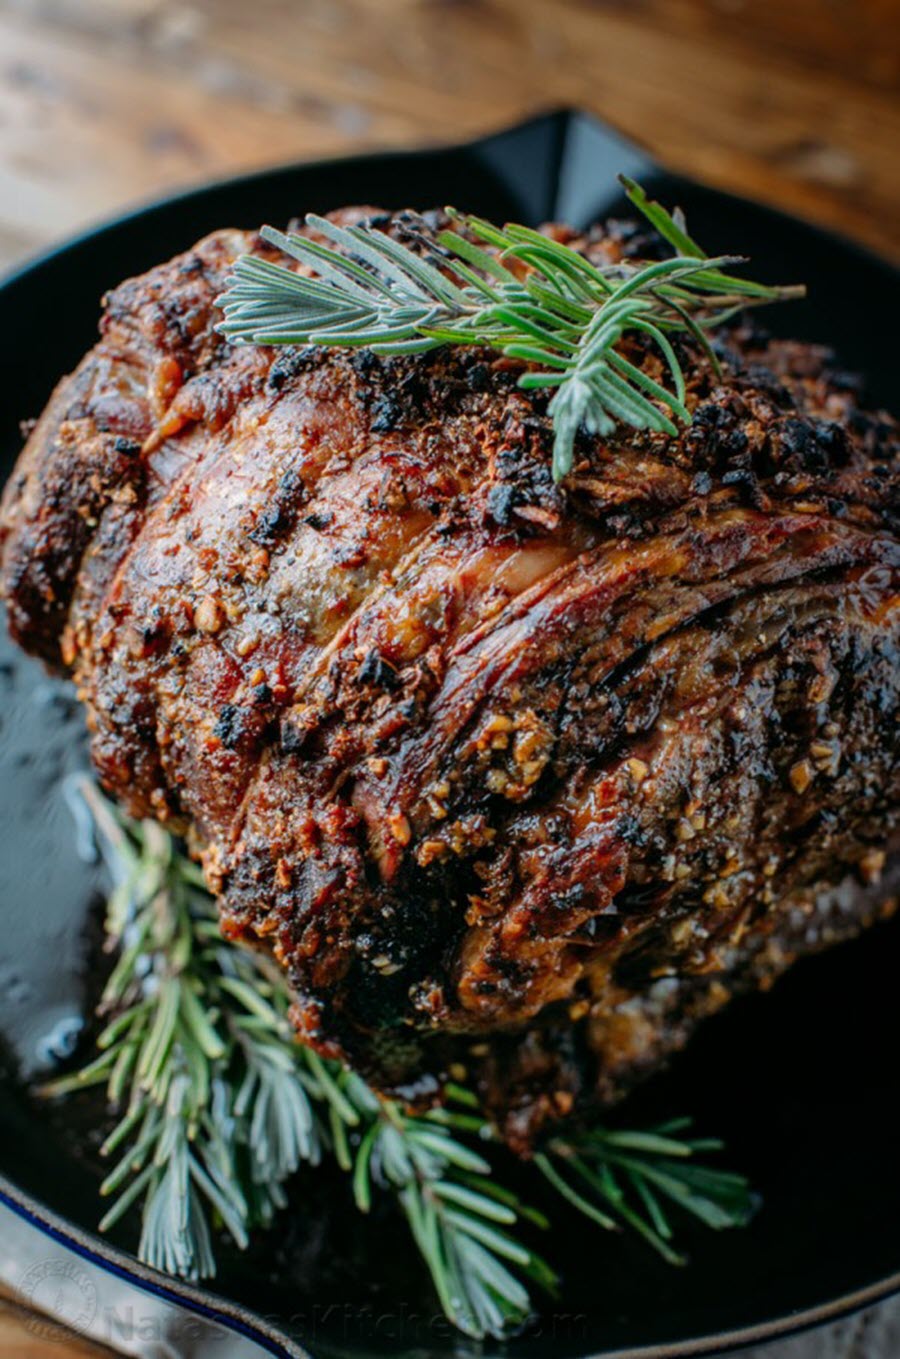 Holiday Christmas Wine Pairings for Every Meal - What wine goes with Prime Rib, Roast, + Brisket